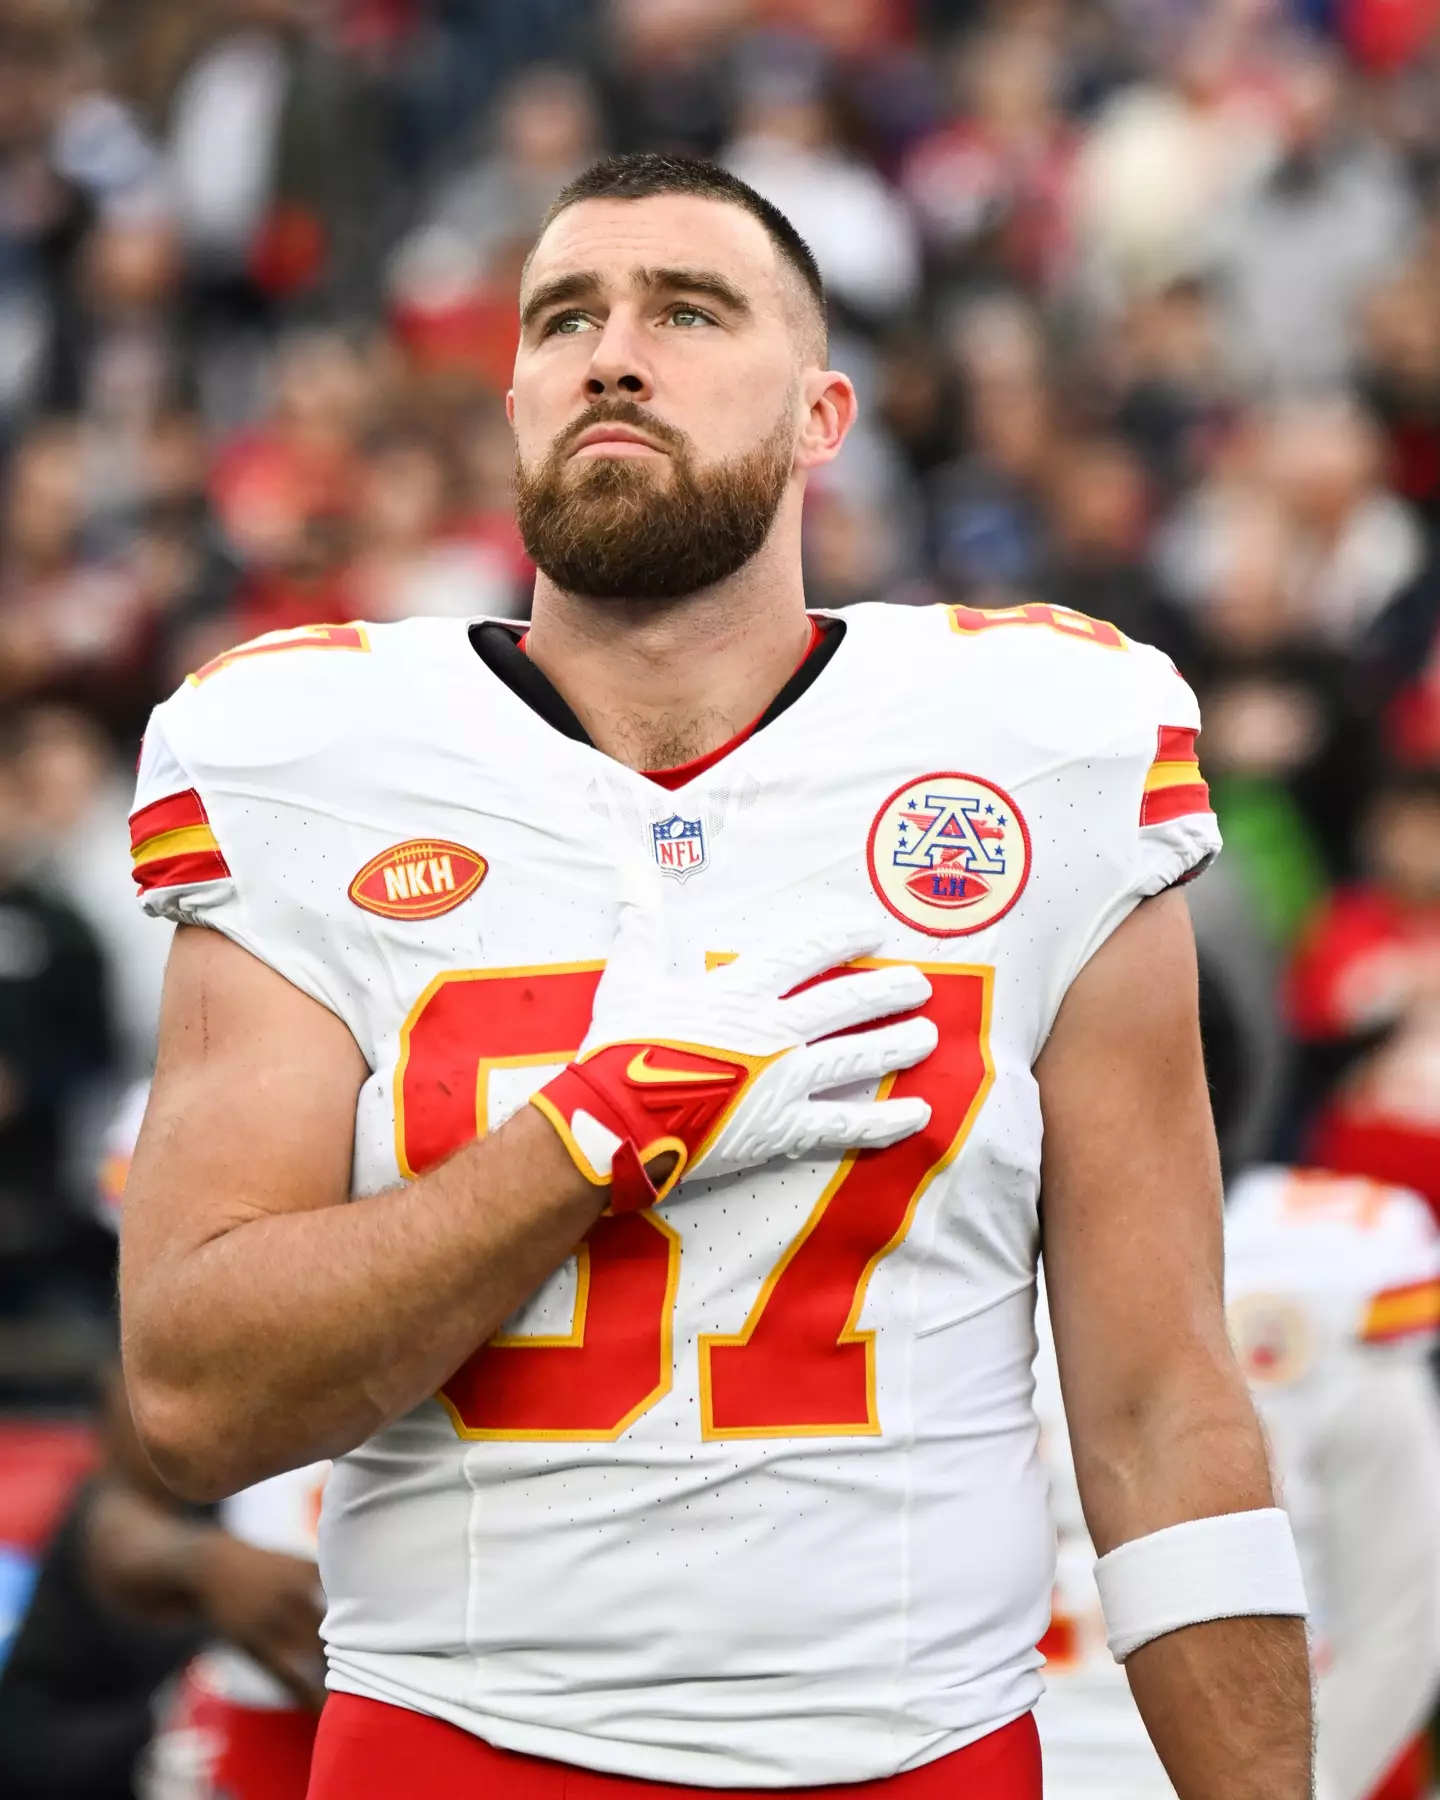 Travis Kelce will be playing at the Super Bowl next month.